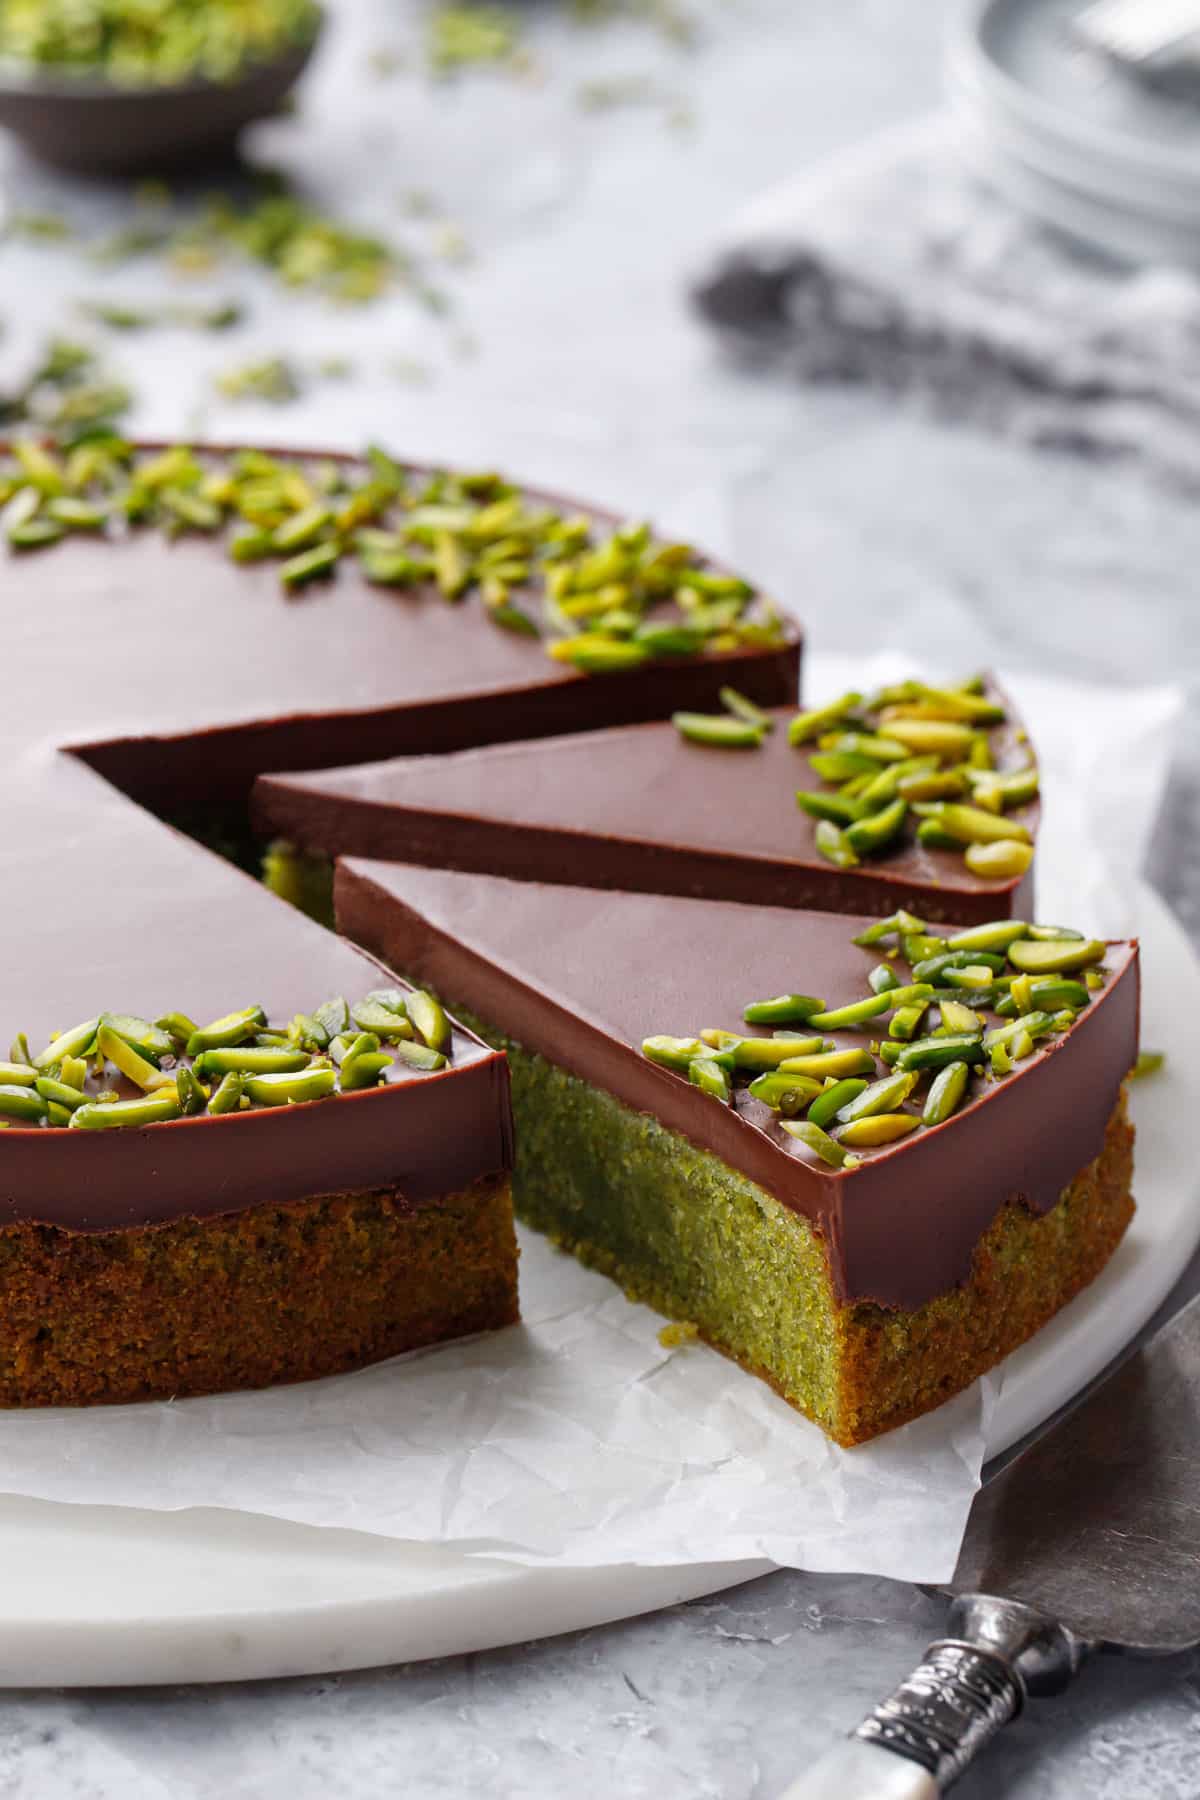 Two cut slices of Flourless Pistachio Cake with Chocolate Ganache and a border of bright green slivered pistachios, on a piece of crinkled parchment paper sitting on a marble cake plate.